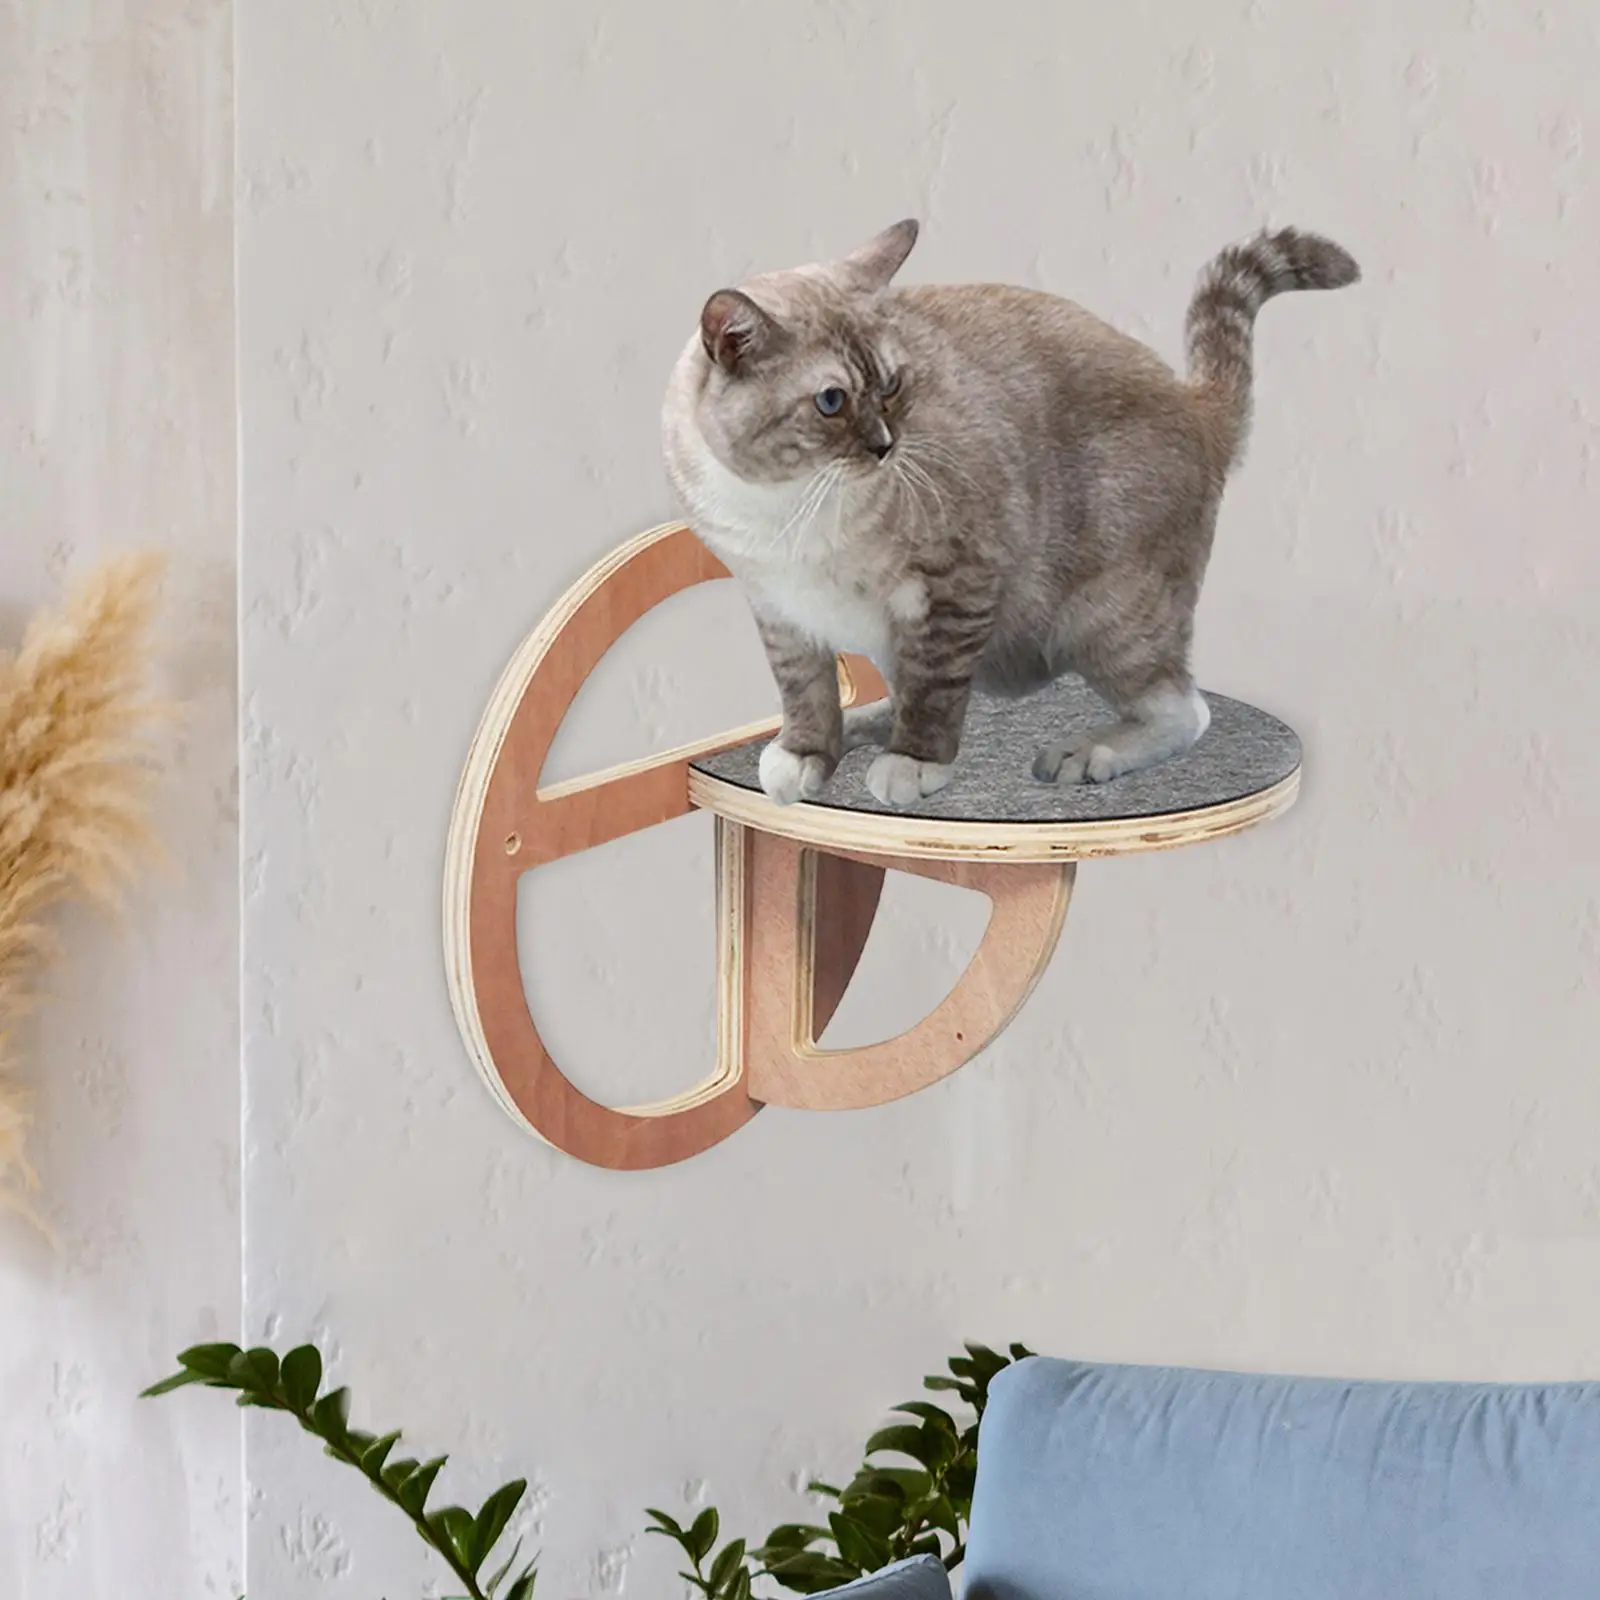 Cat Shelves Wall Mounted Perches Wooden Cat Steps Cat Jumping Platform Cat Furniture for Indoor Cats Sleeping Lounging